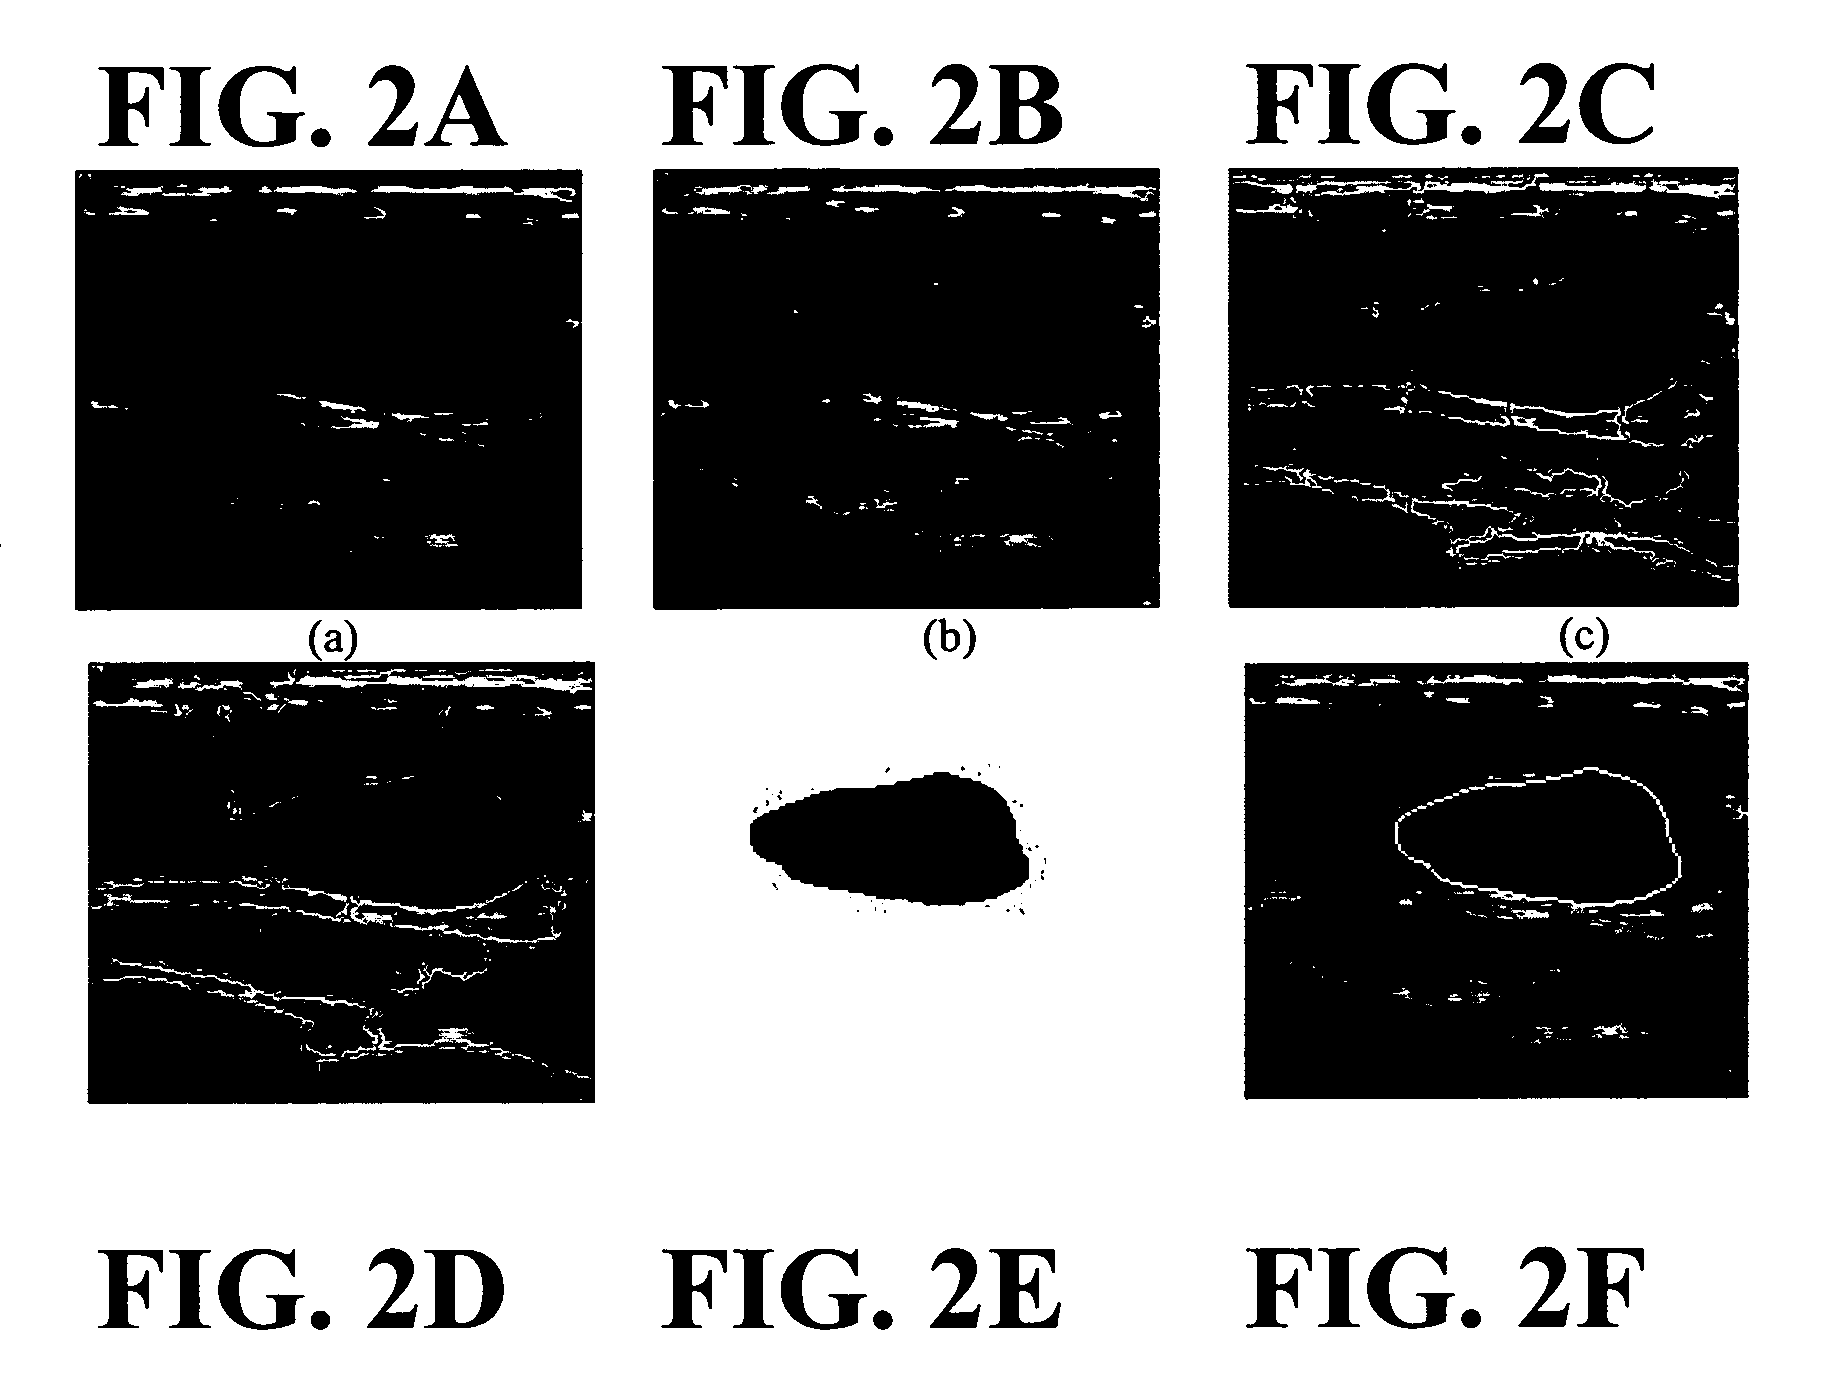 Segmentation of lesions in ultrasound images